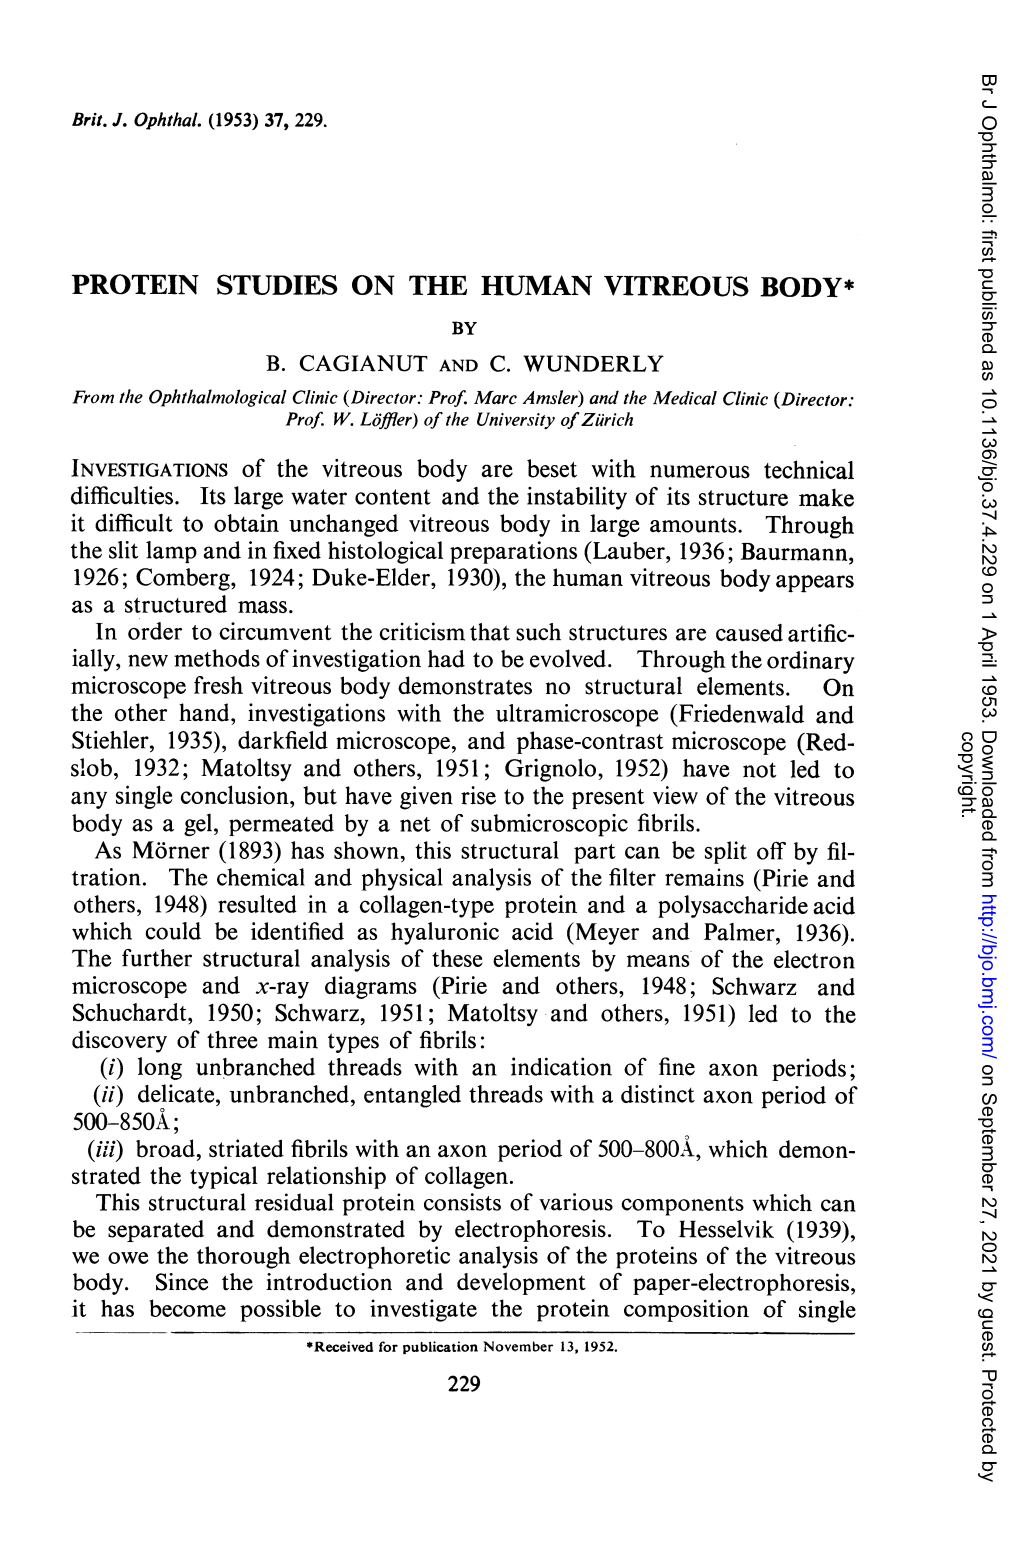 Protein Studies on the Human Vitreous Body* by B